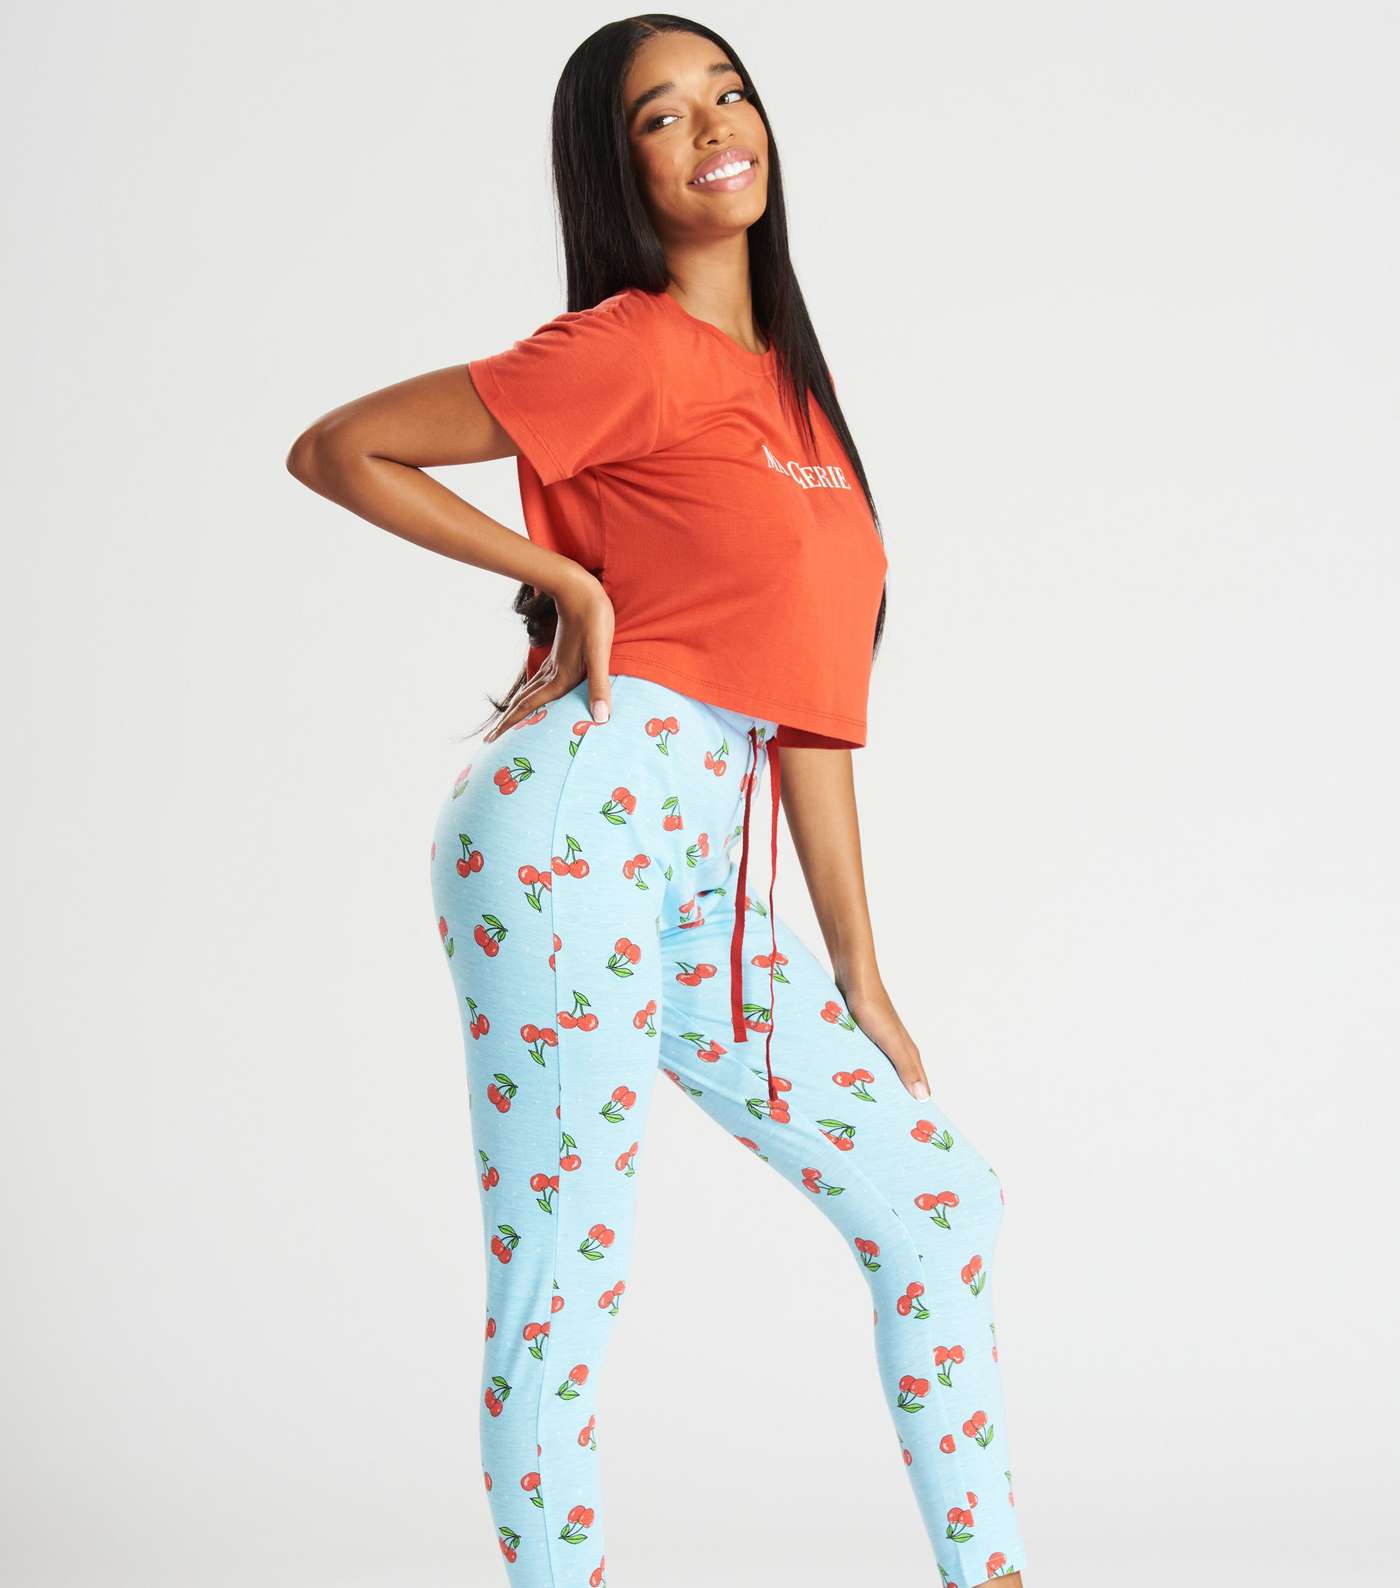 Loungeable Red Legging Pyjama Set with Cherry Print Image 3